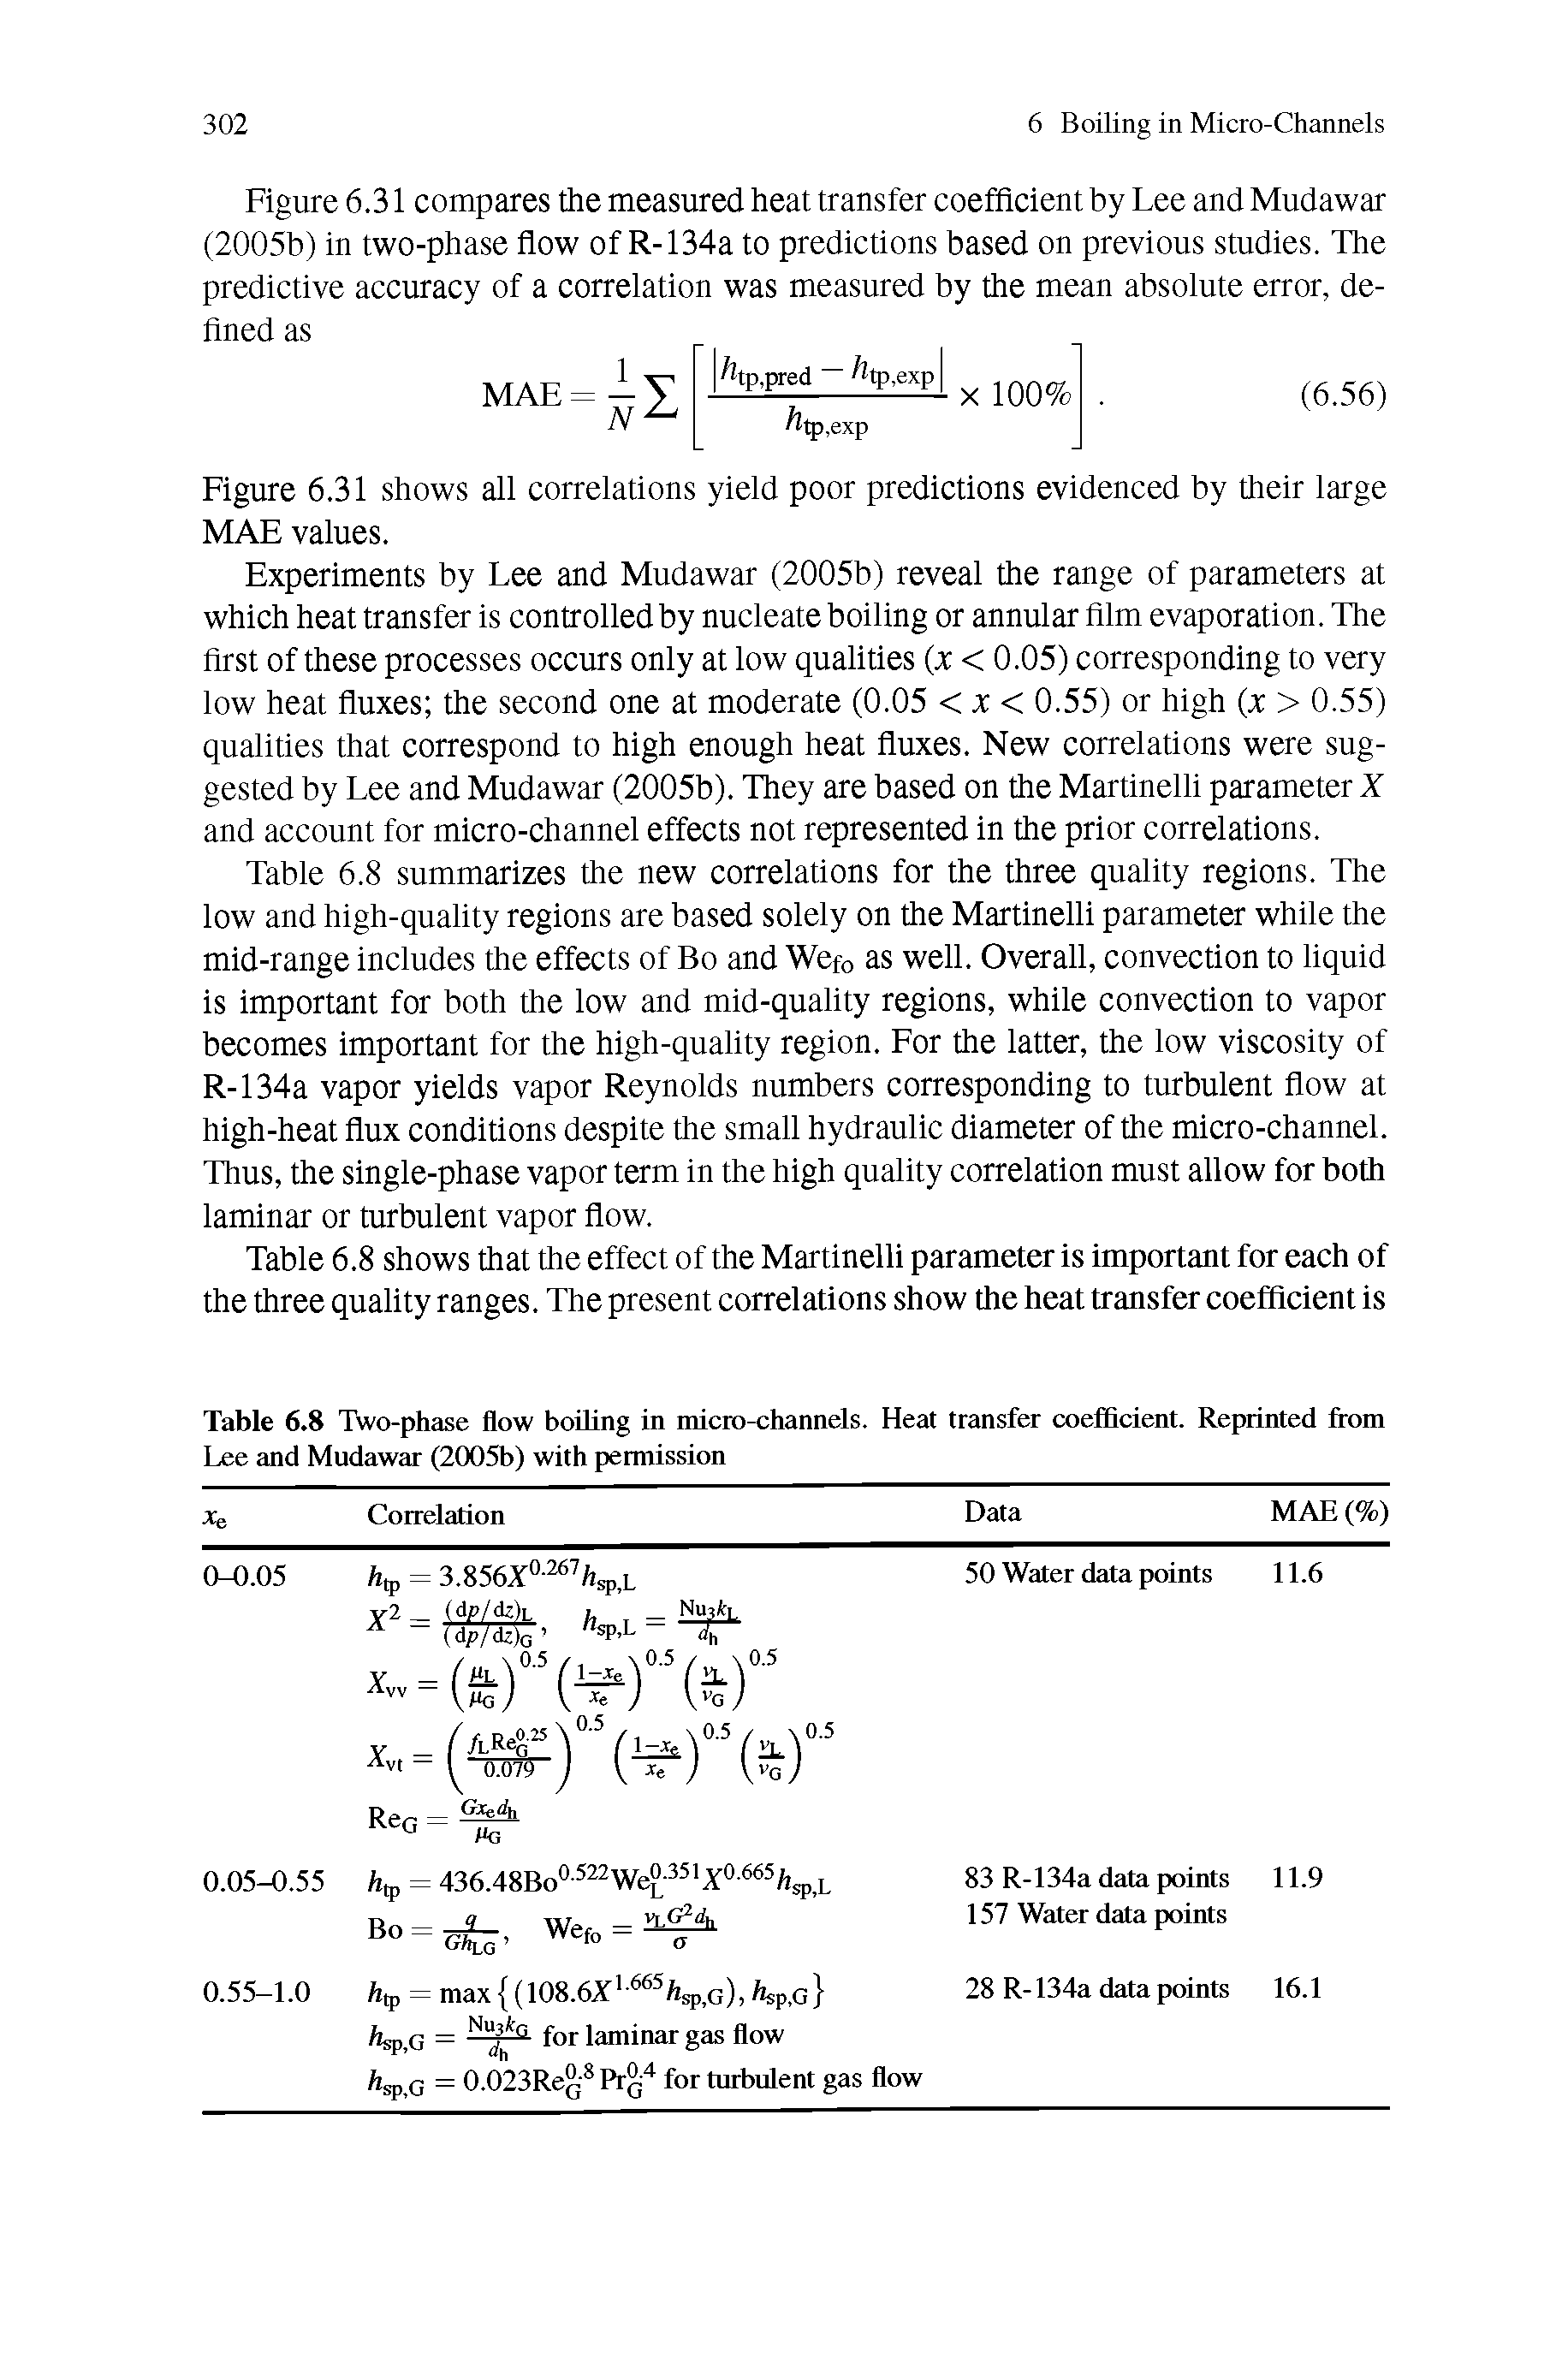 Table 6.8 Two-phase flow boiling in micro-channels. Heat transfer coefficient. Reprinted from Lee and Mudawar (2005b) with permission...